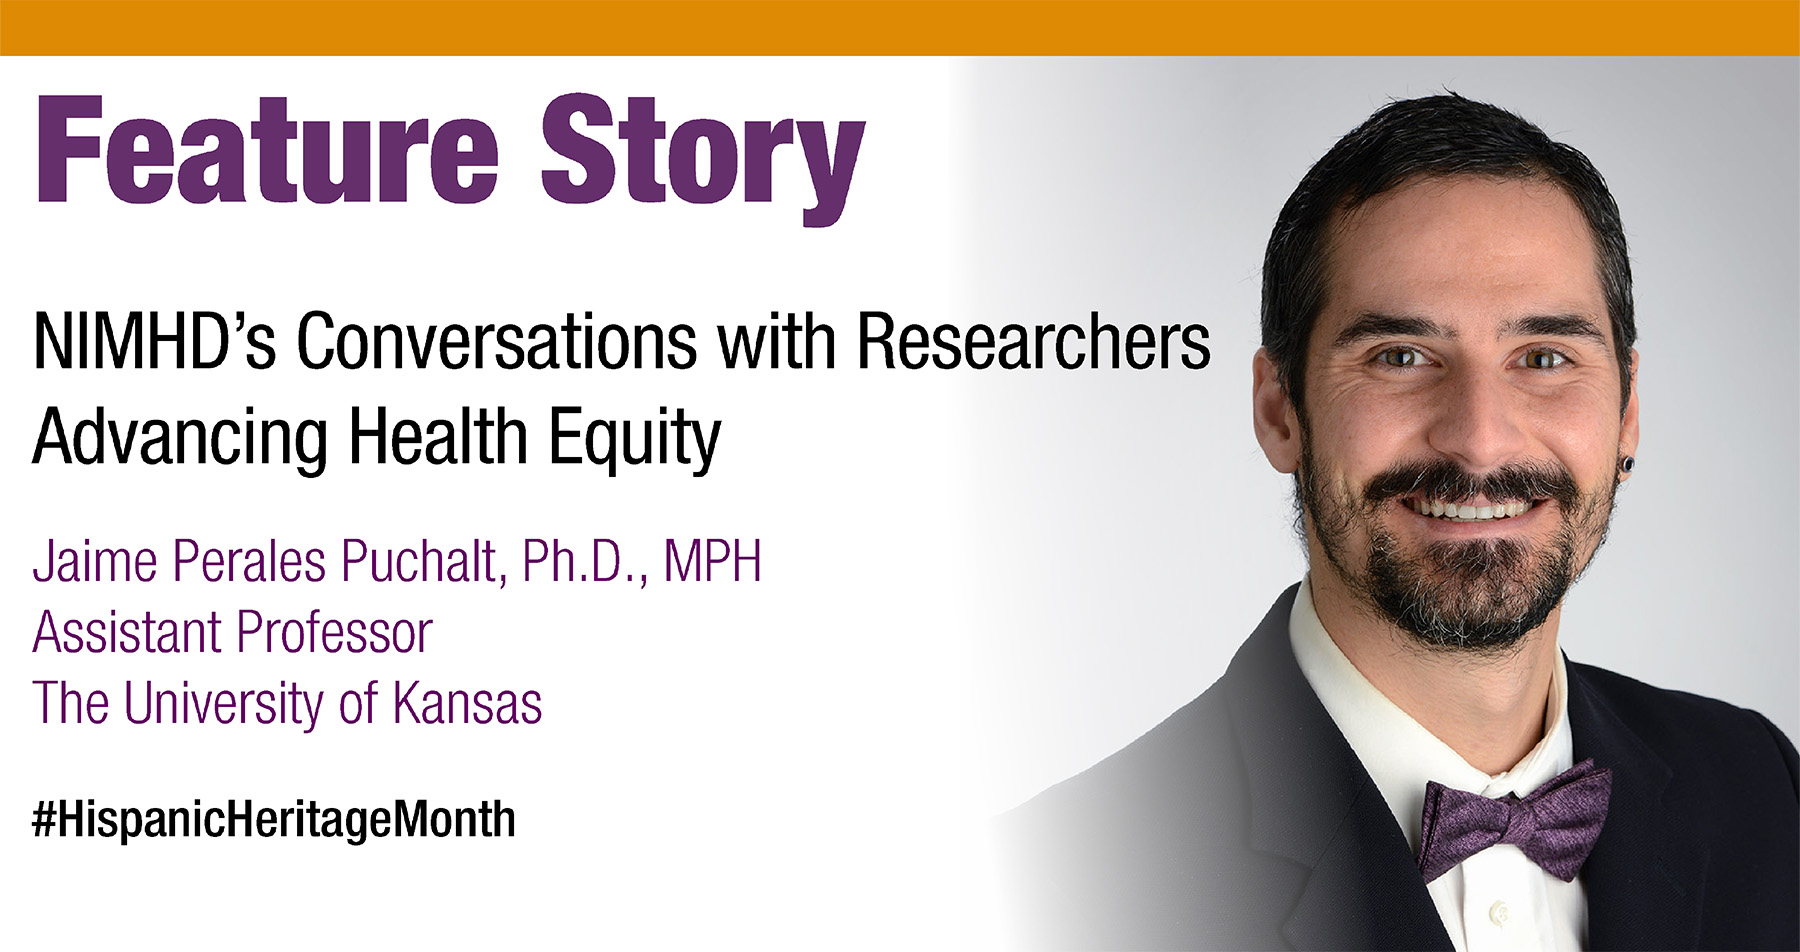 NIMHD's Conversations with Researchers Advancing Health Equity for Hispanic Heritage Month: Dr. Jaime Perales Puchalt